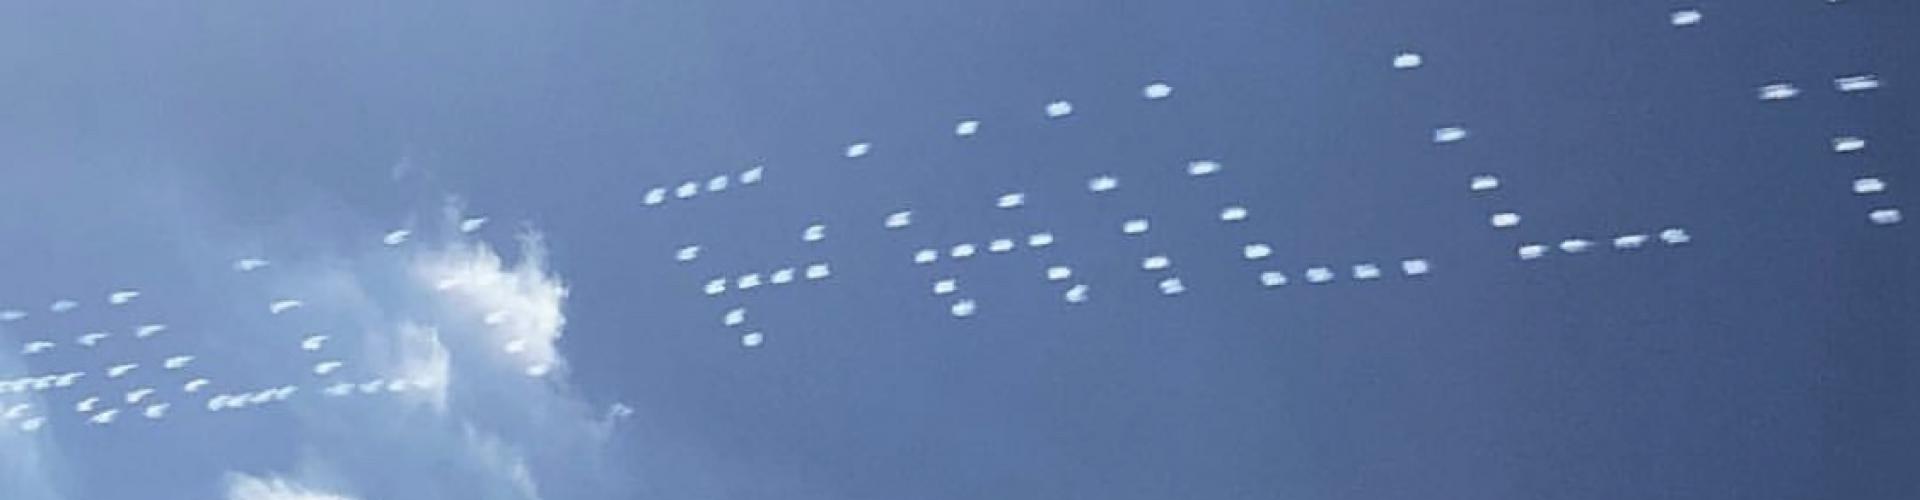 A light show in the sky where the dots spell a word